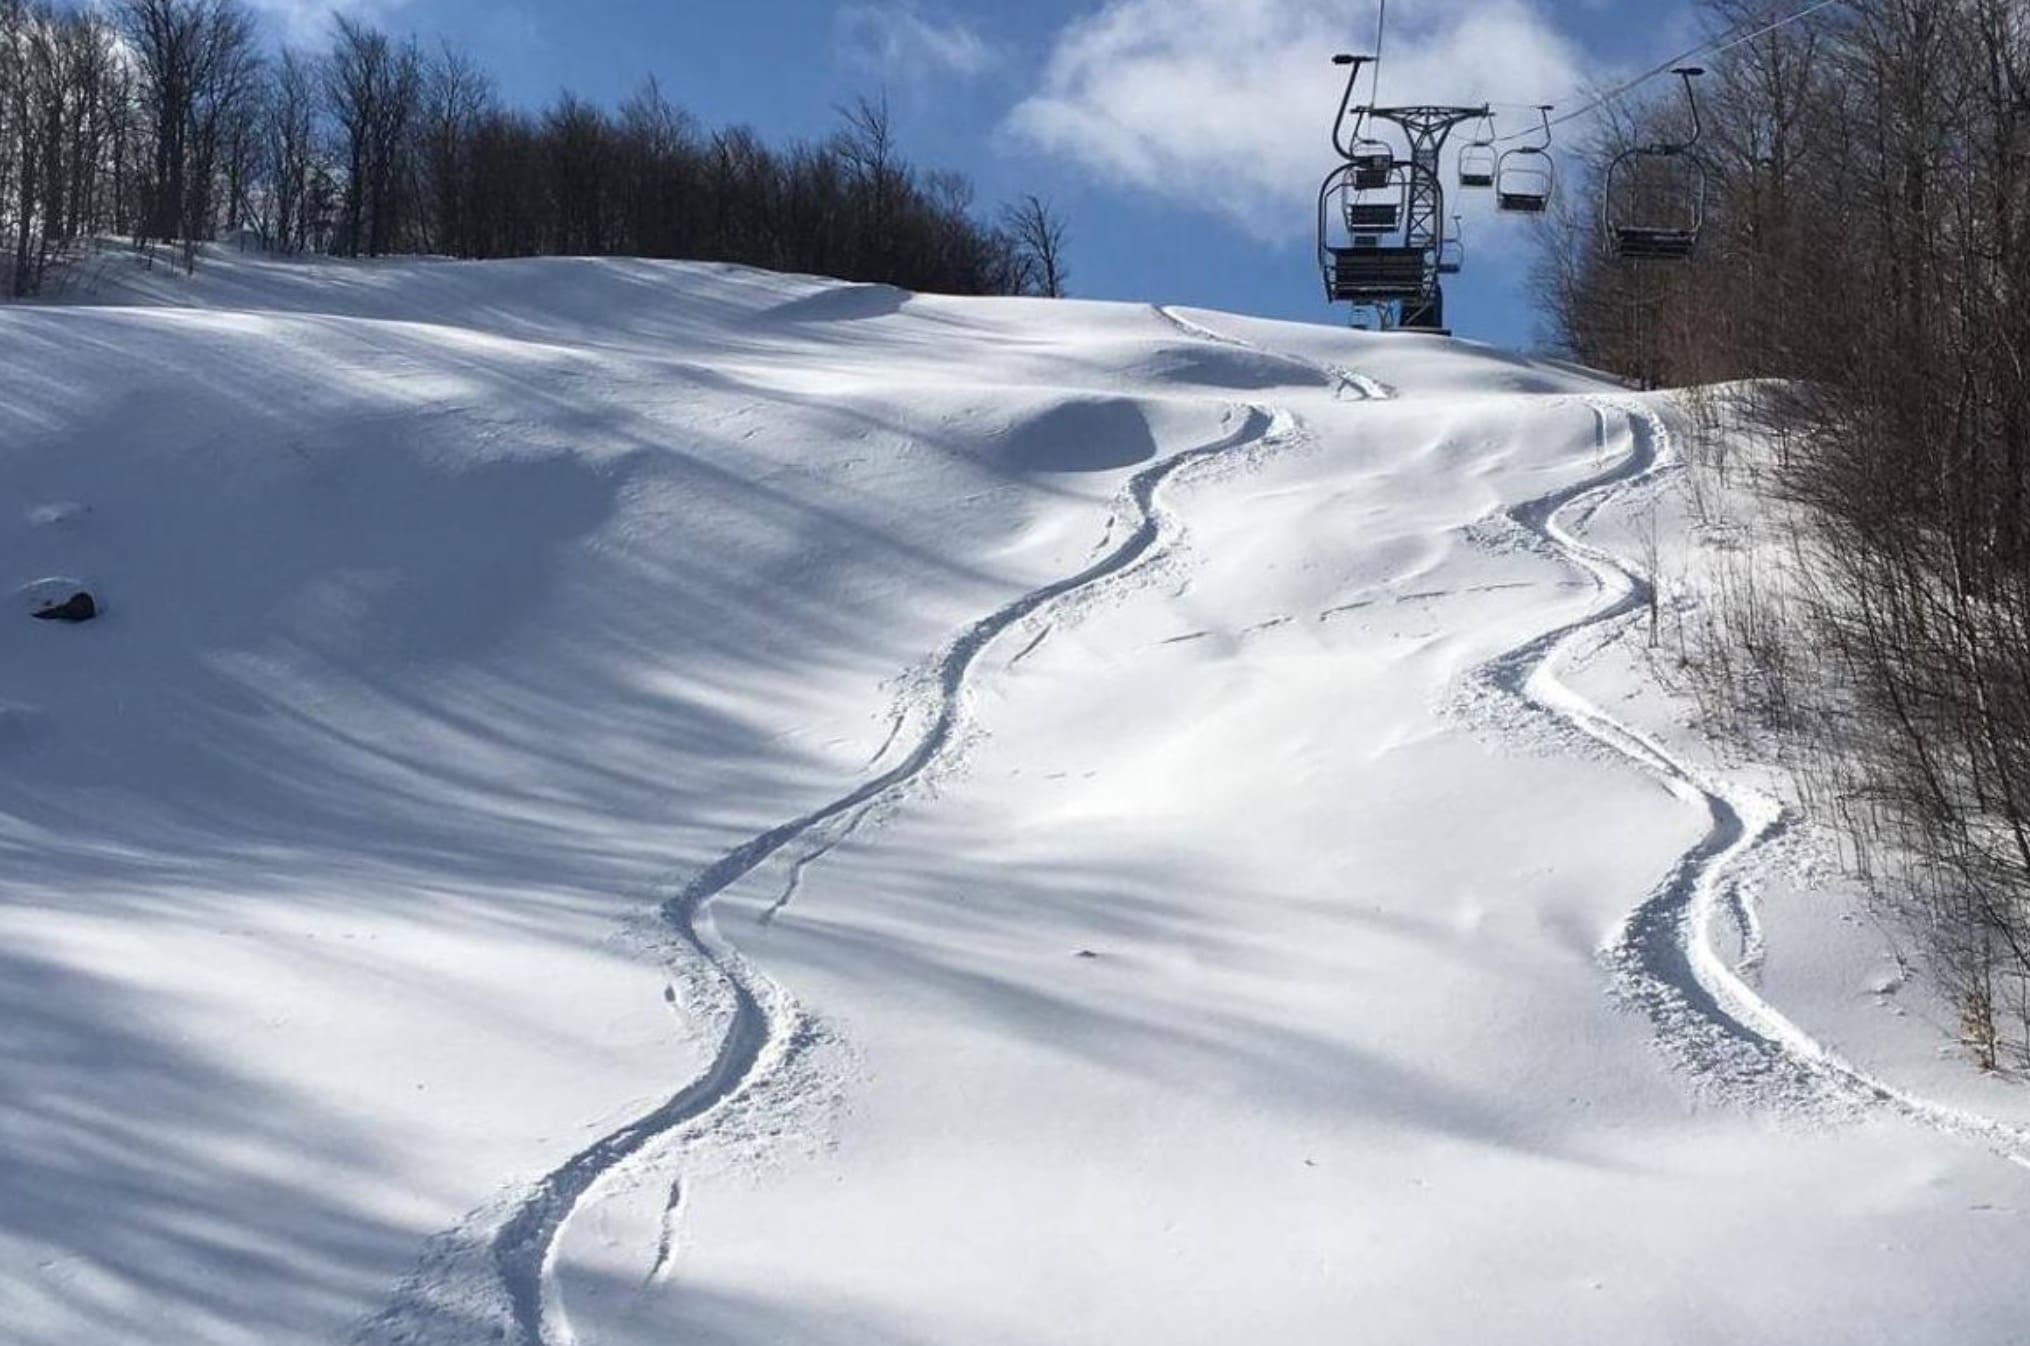 FOR SALE: Turnkey Vermont Ski Area (Closed Since 2018)